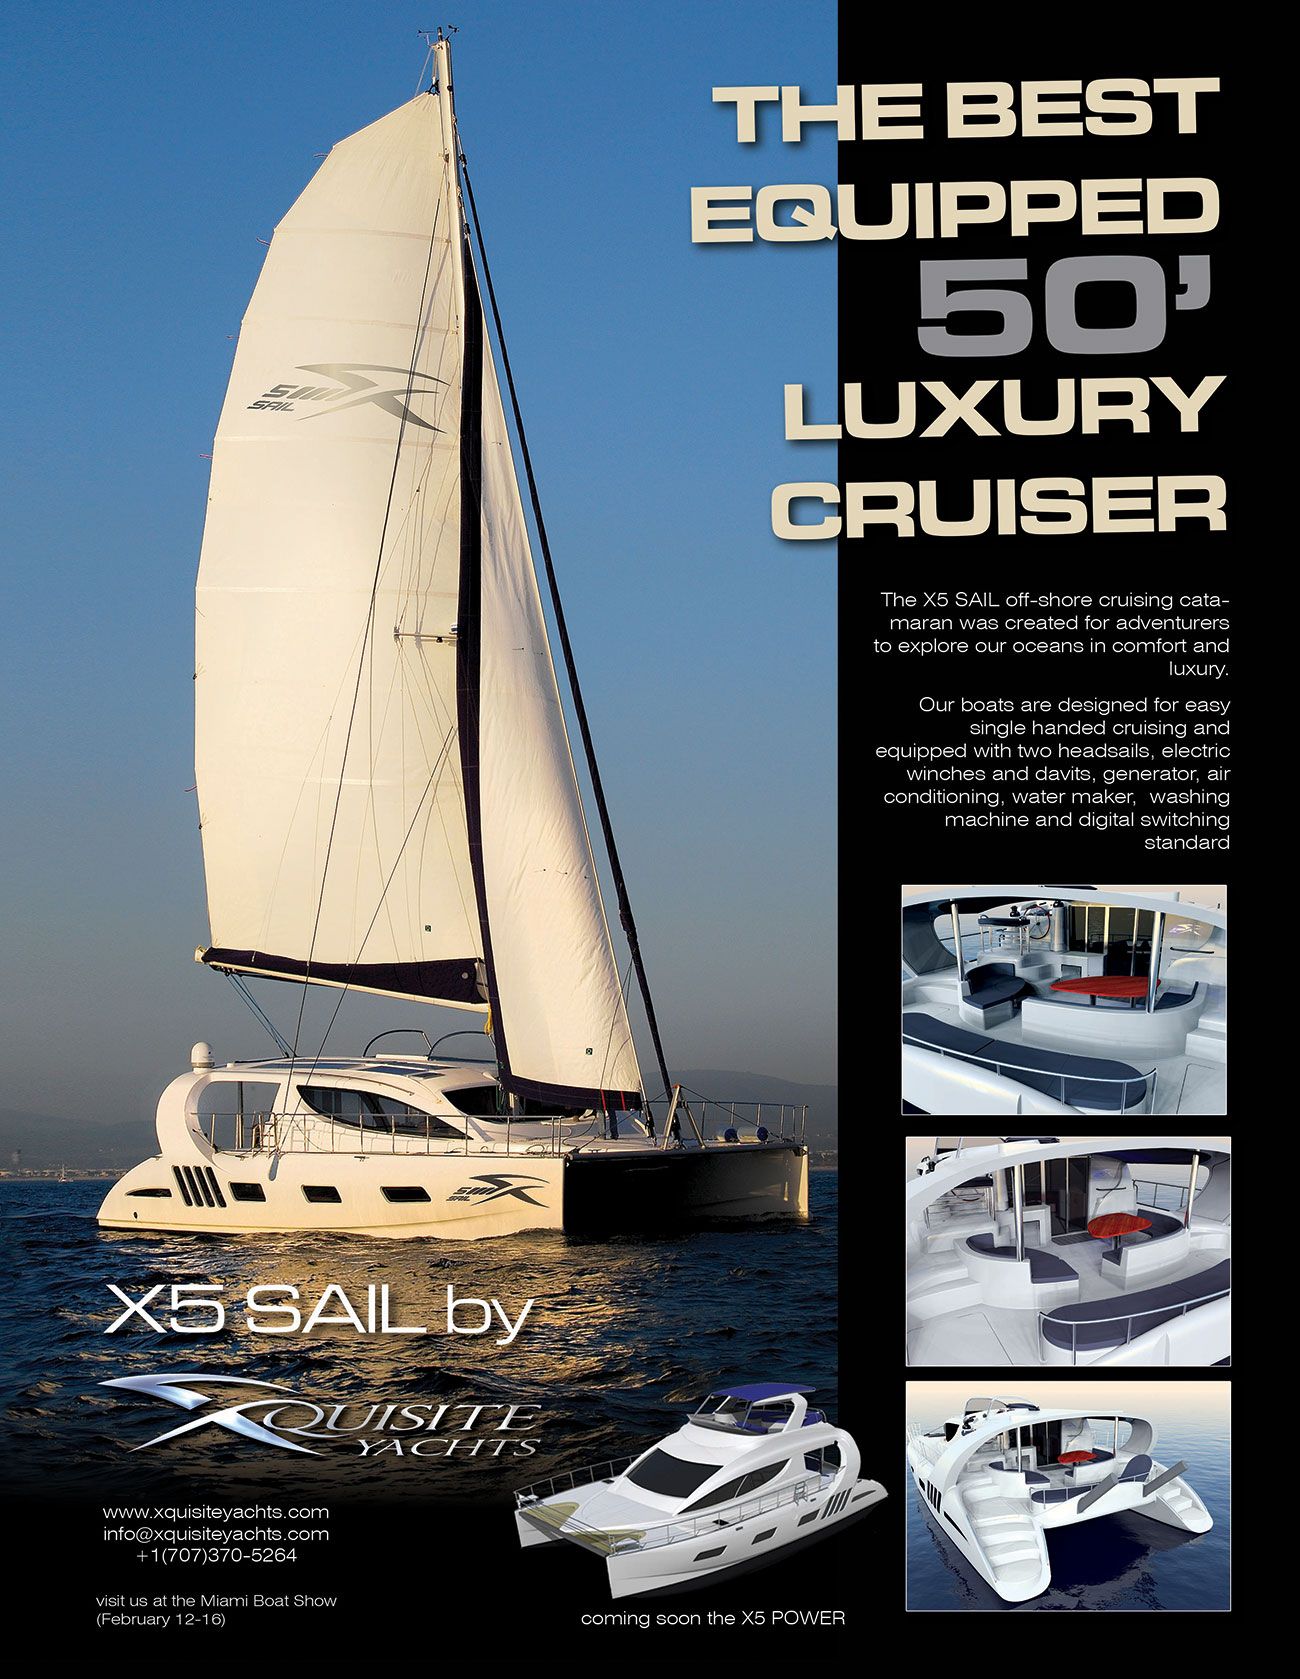 The Best Equipped 50' Luxury Cruiser